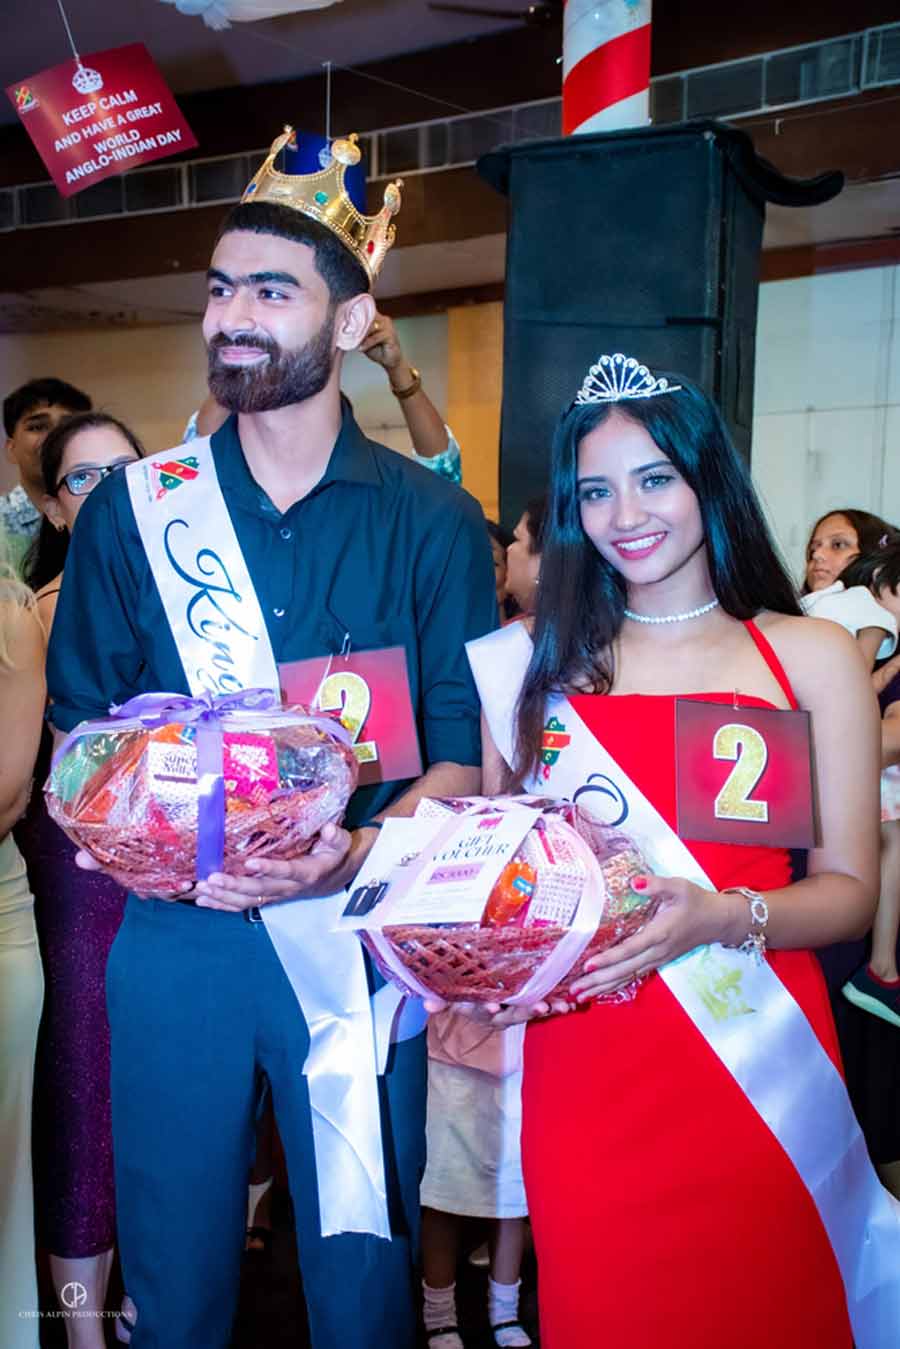 CROWNING GLORY: The highlight of the evening was the crowning of the Anglo-Indian King and Queen. Amidst a sea of cheers and applause, Daniel Pope was crowned as the King and Marina Lisa Chowdhury was crowned the Queen